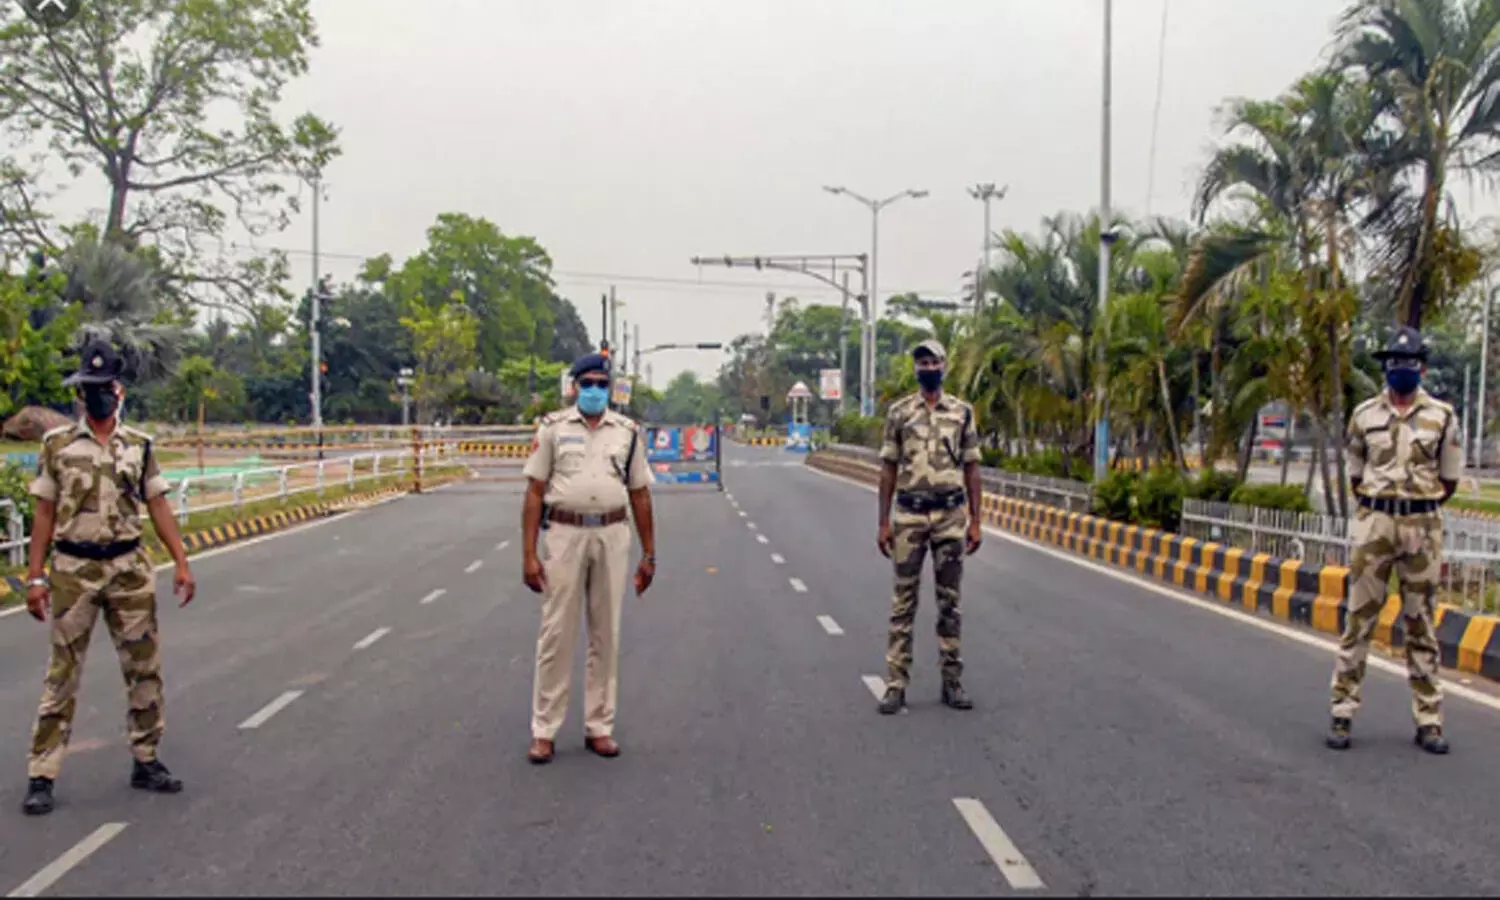 COVID-19: Odisha Govt announces 14-day Lockdown from 5th to 19th May